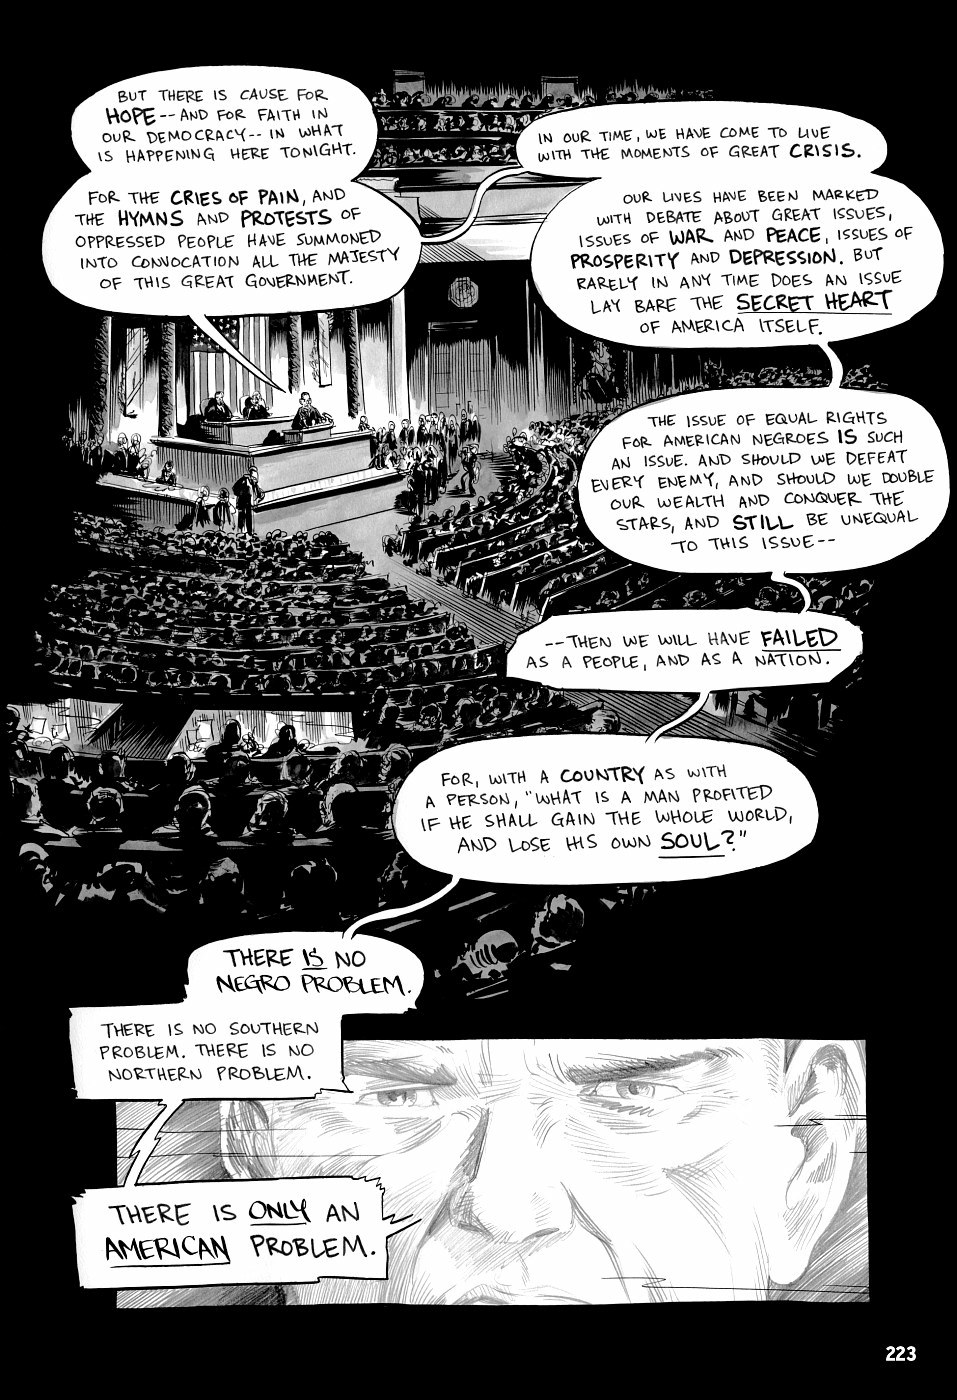 page 223 of march book three graphic novel